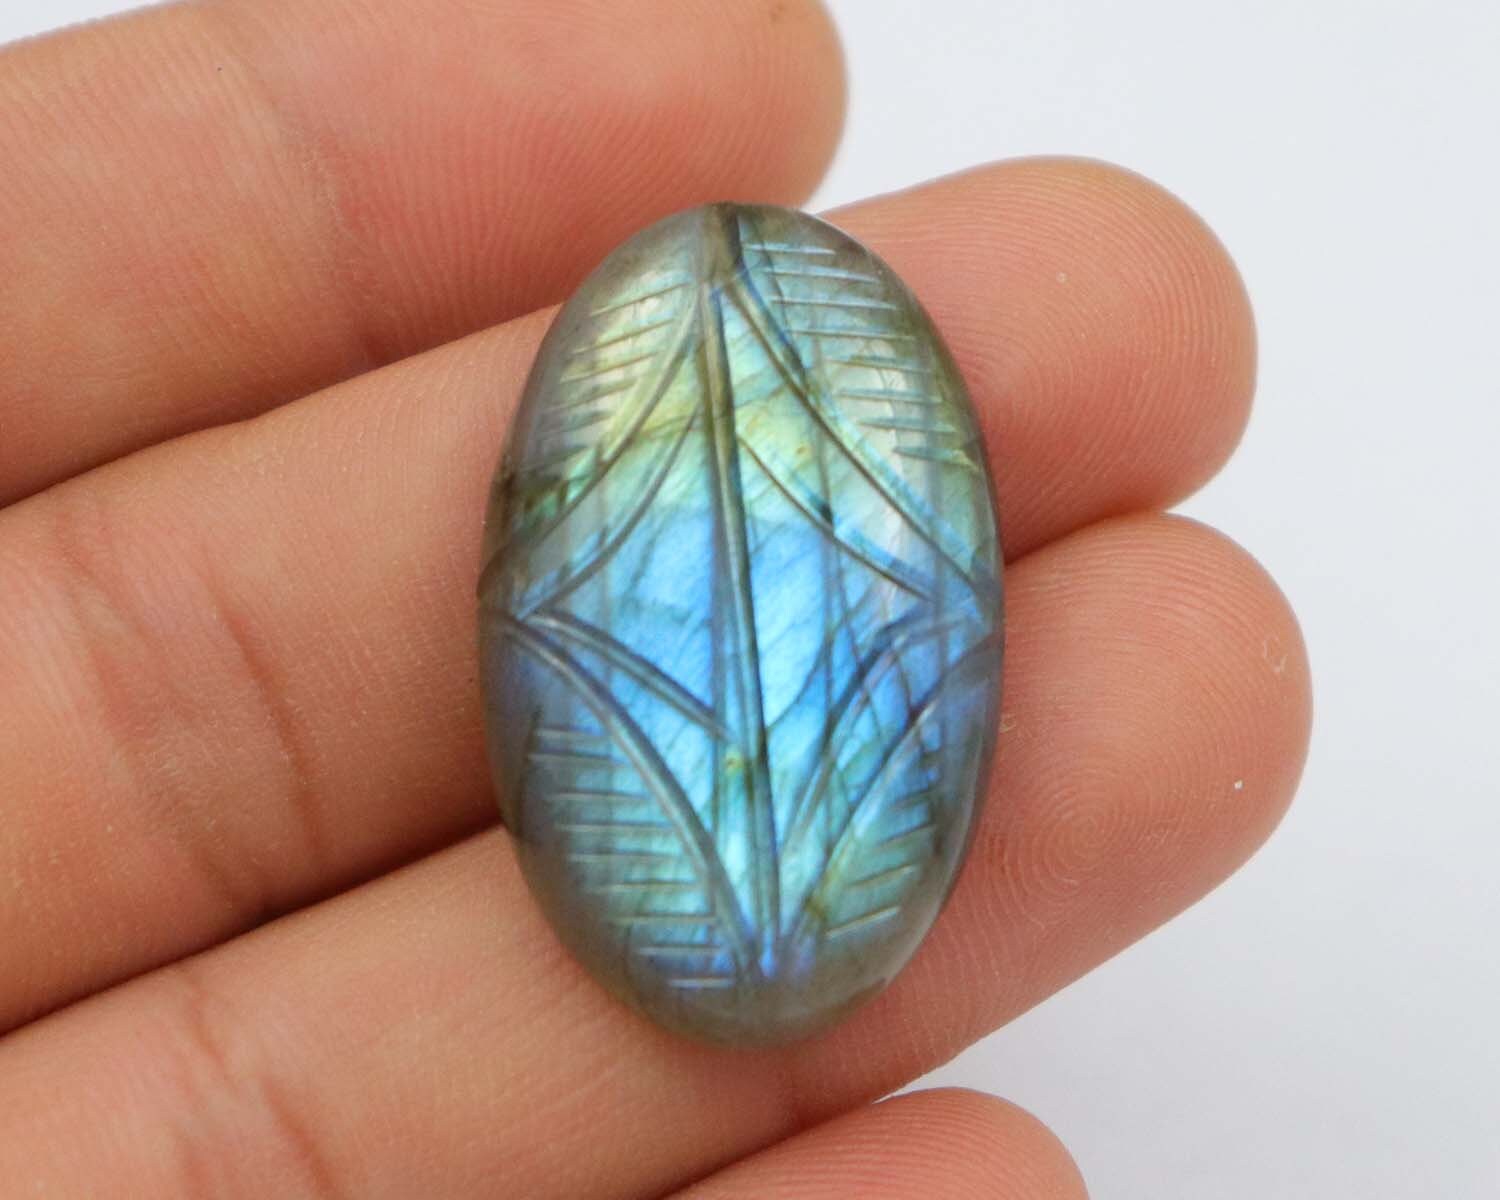 Natural Labradorite Carved Christmas Gift Amazing Labradorite Carving Gemstone 42.2 Carat Oval Shape Carving Cabochon For Jewelry